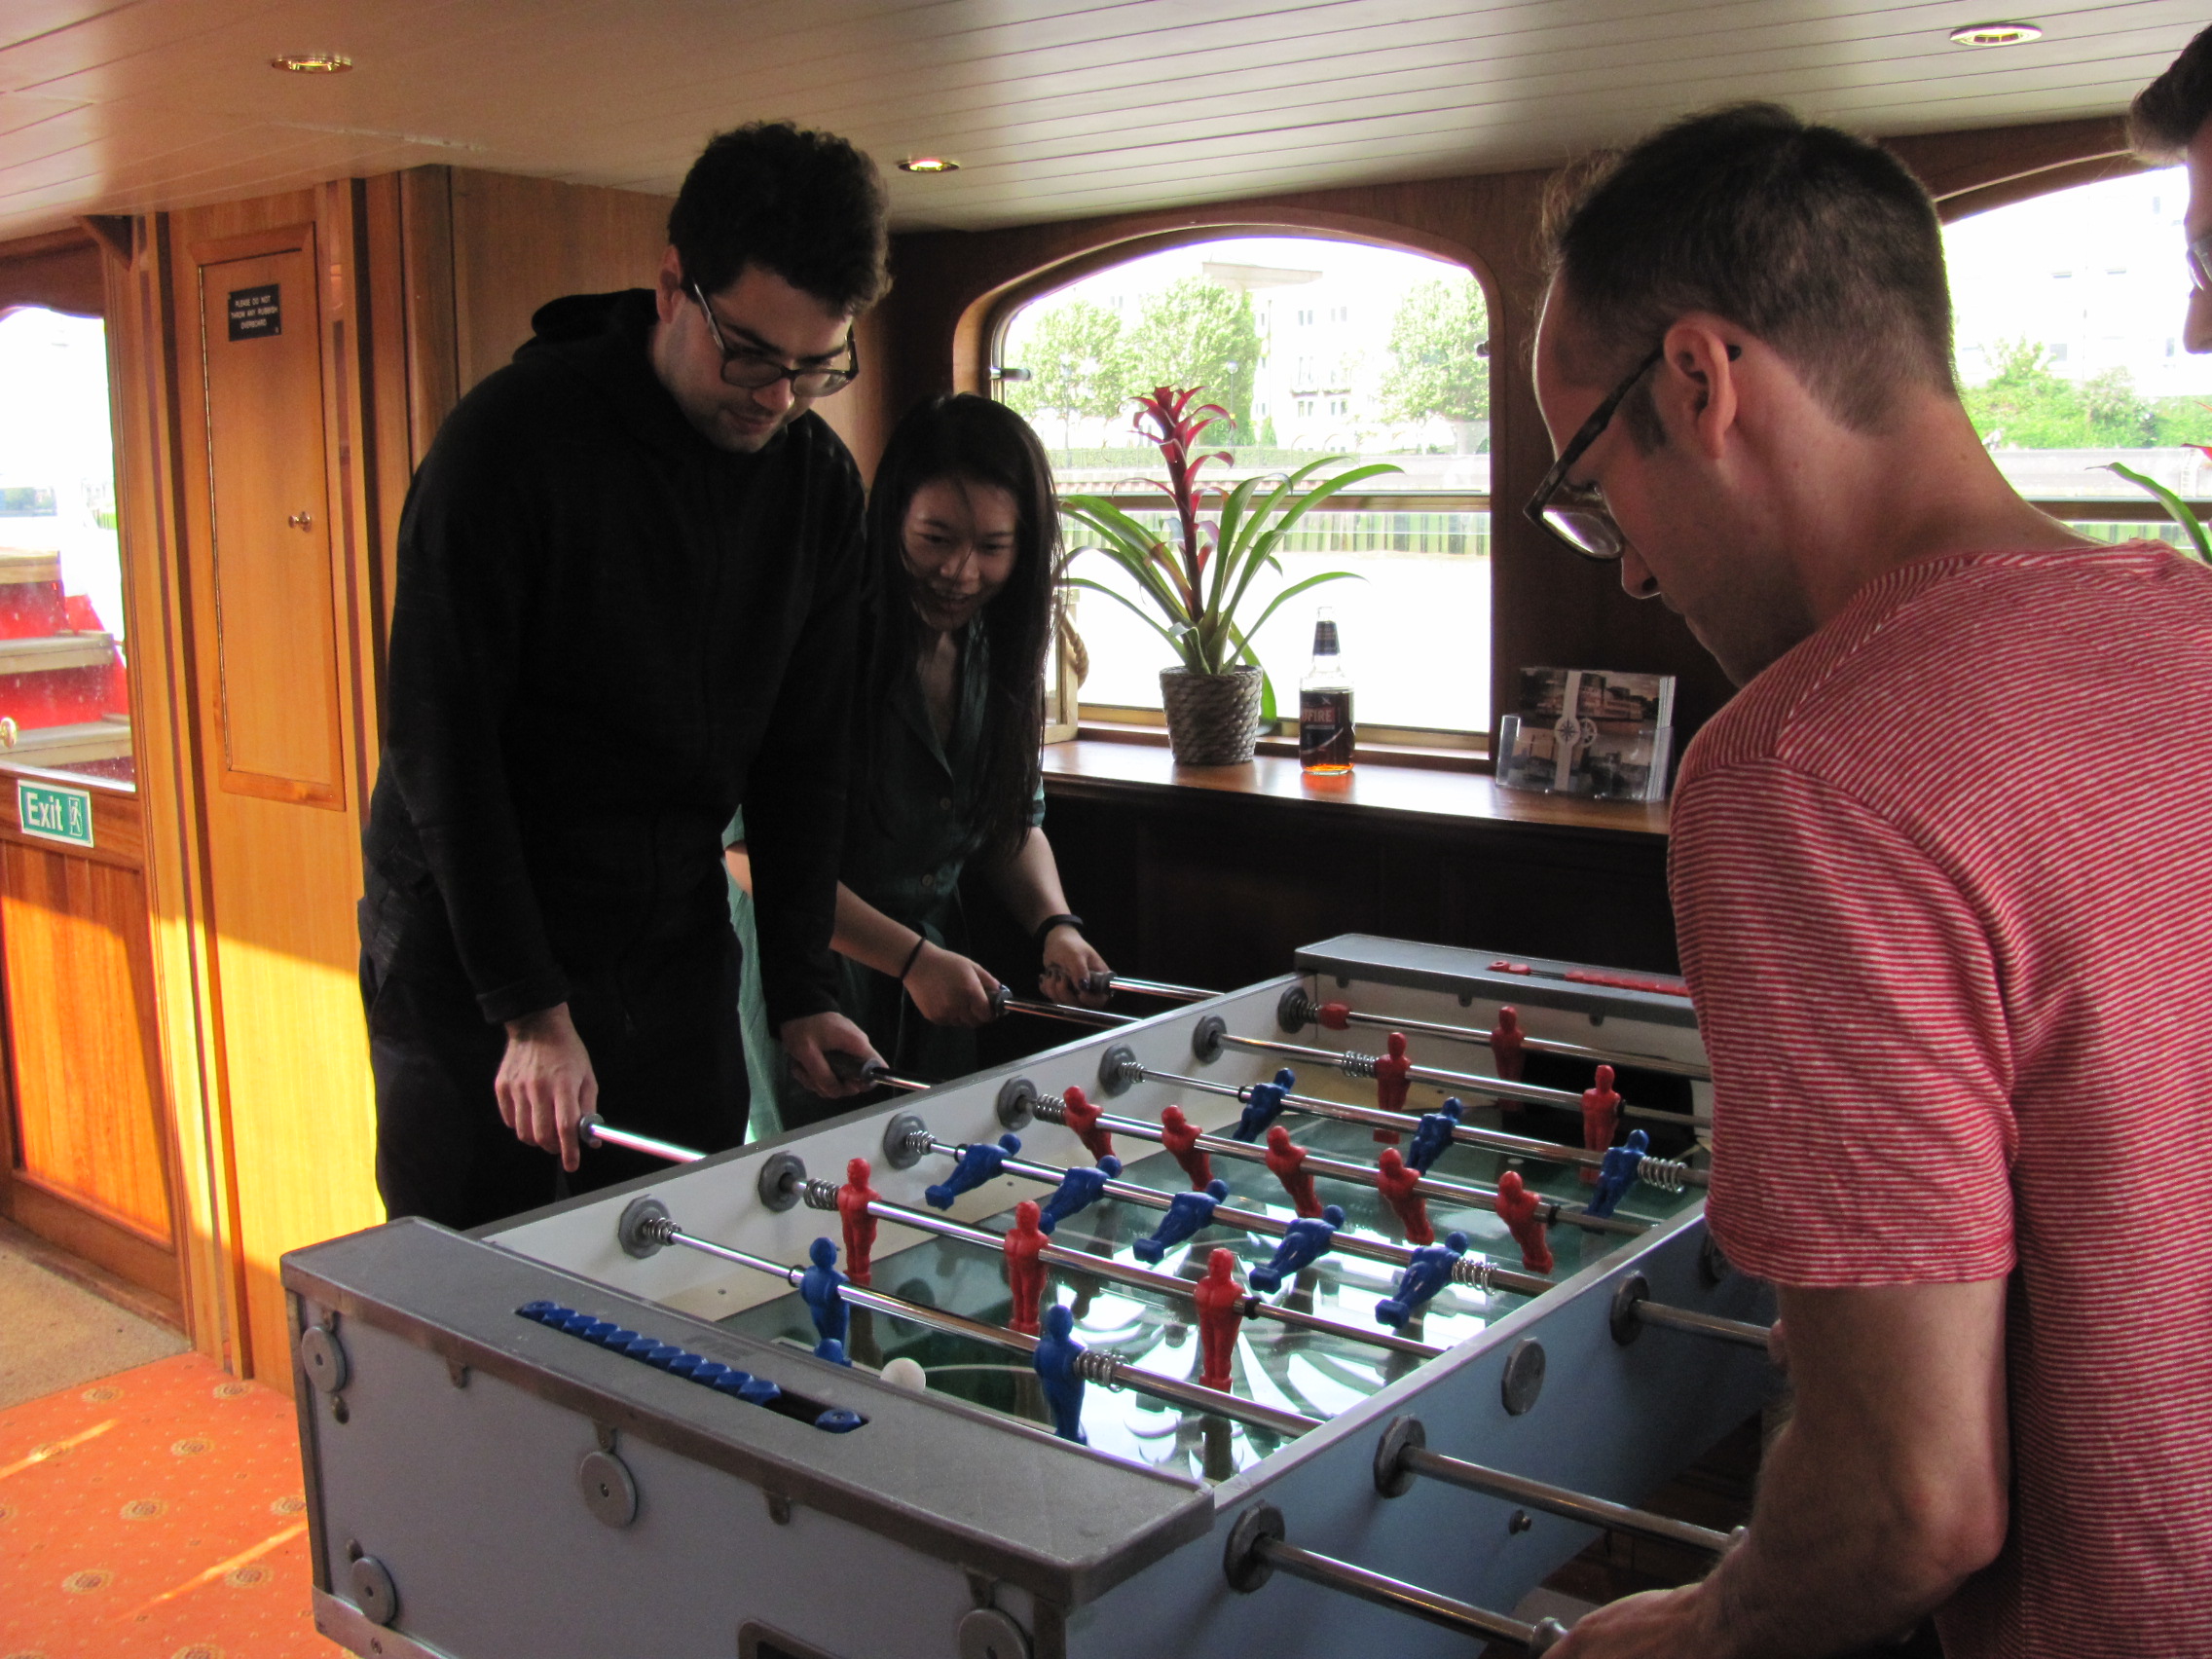 Image 1 shows people playing foosball. Image 2 shows people with rifles on a boat. Image 3 shows people on a boat. Image 4 shows people gathered around dining tables on a boat.